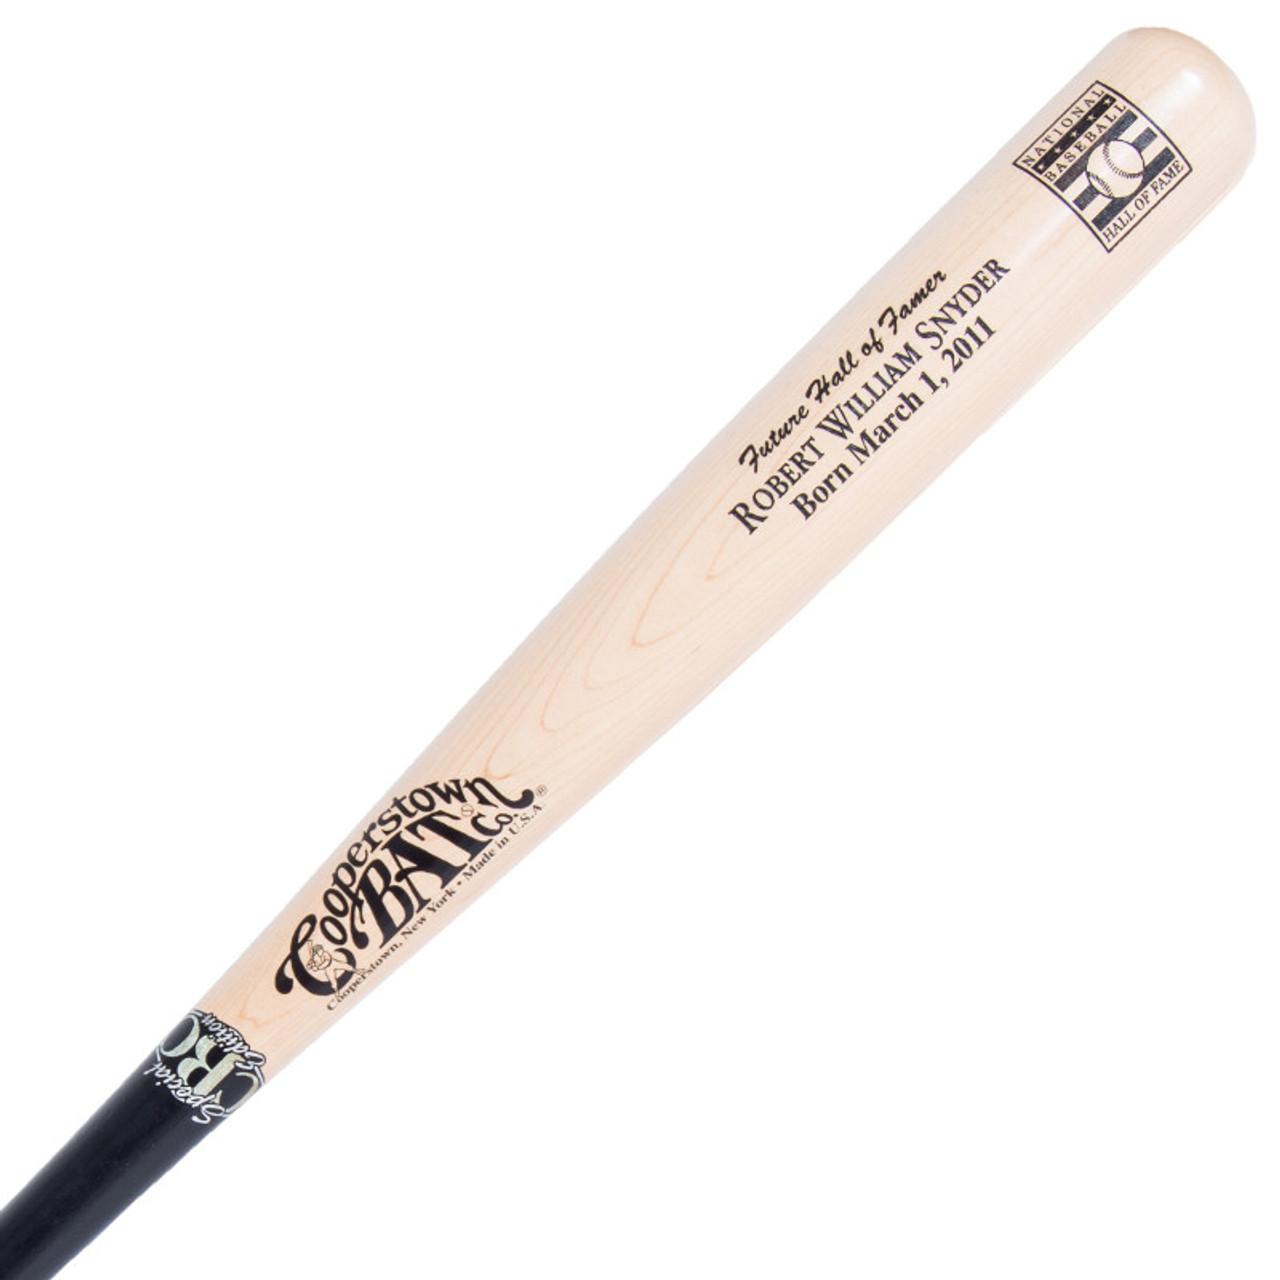 Ted Simmons Autographed Cooperstown Hall of Fame Bat Inscribed